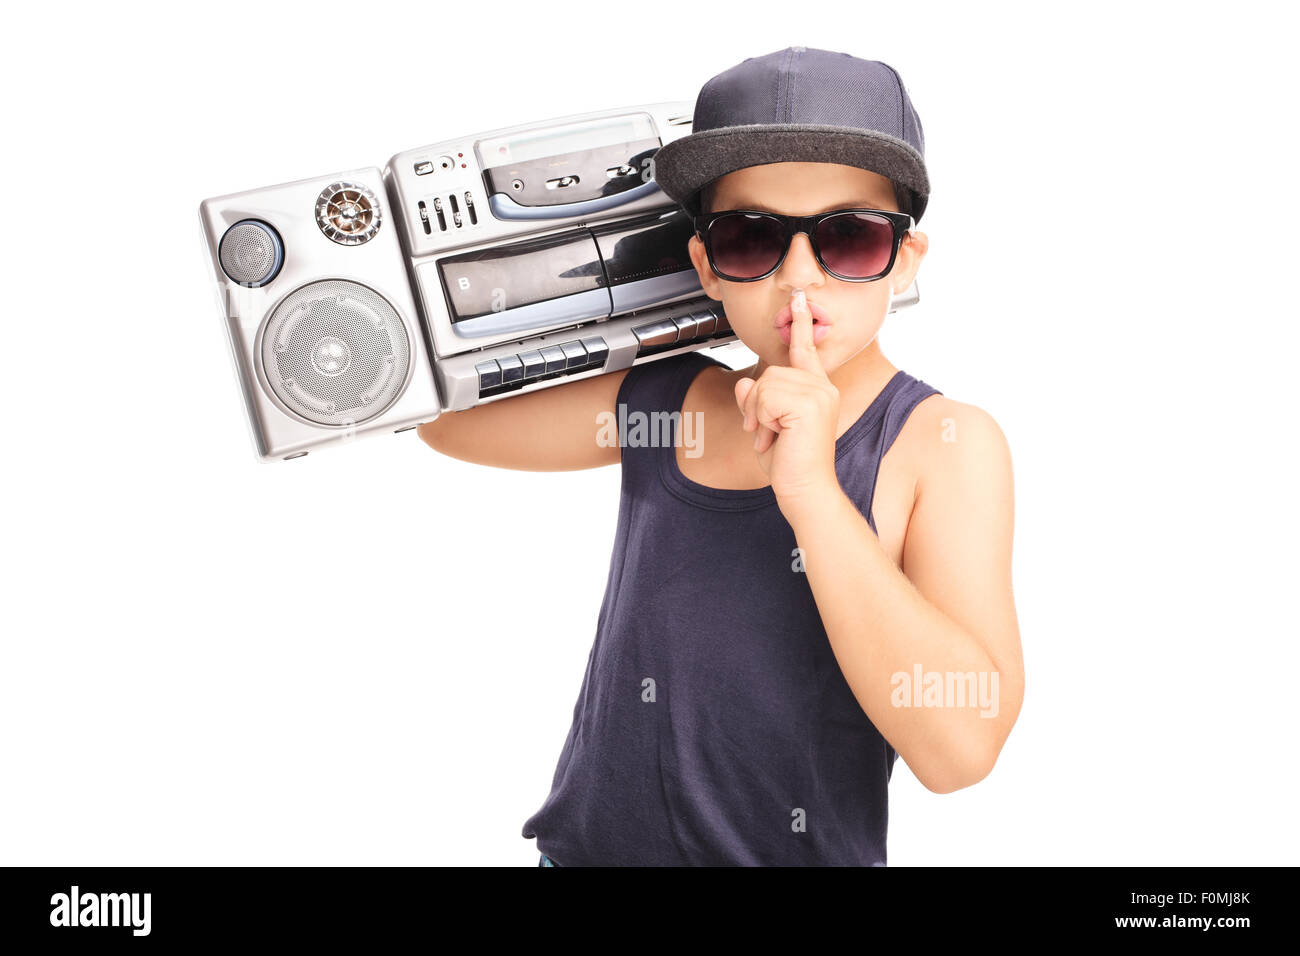 Little boy in hip-hop outfit carrying a ghetto blaster and holding finger on his lips isolated on white background Stock Photo